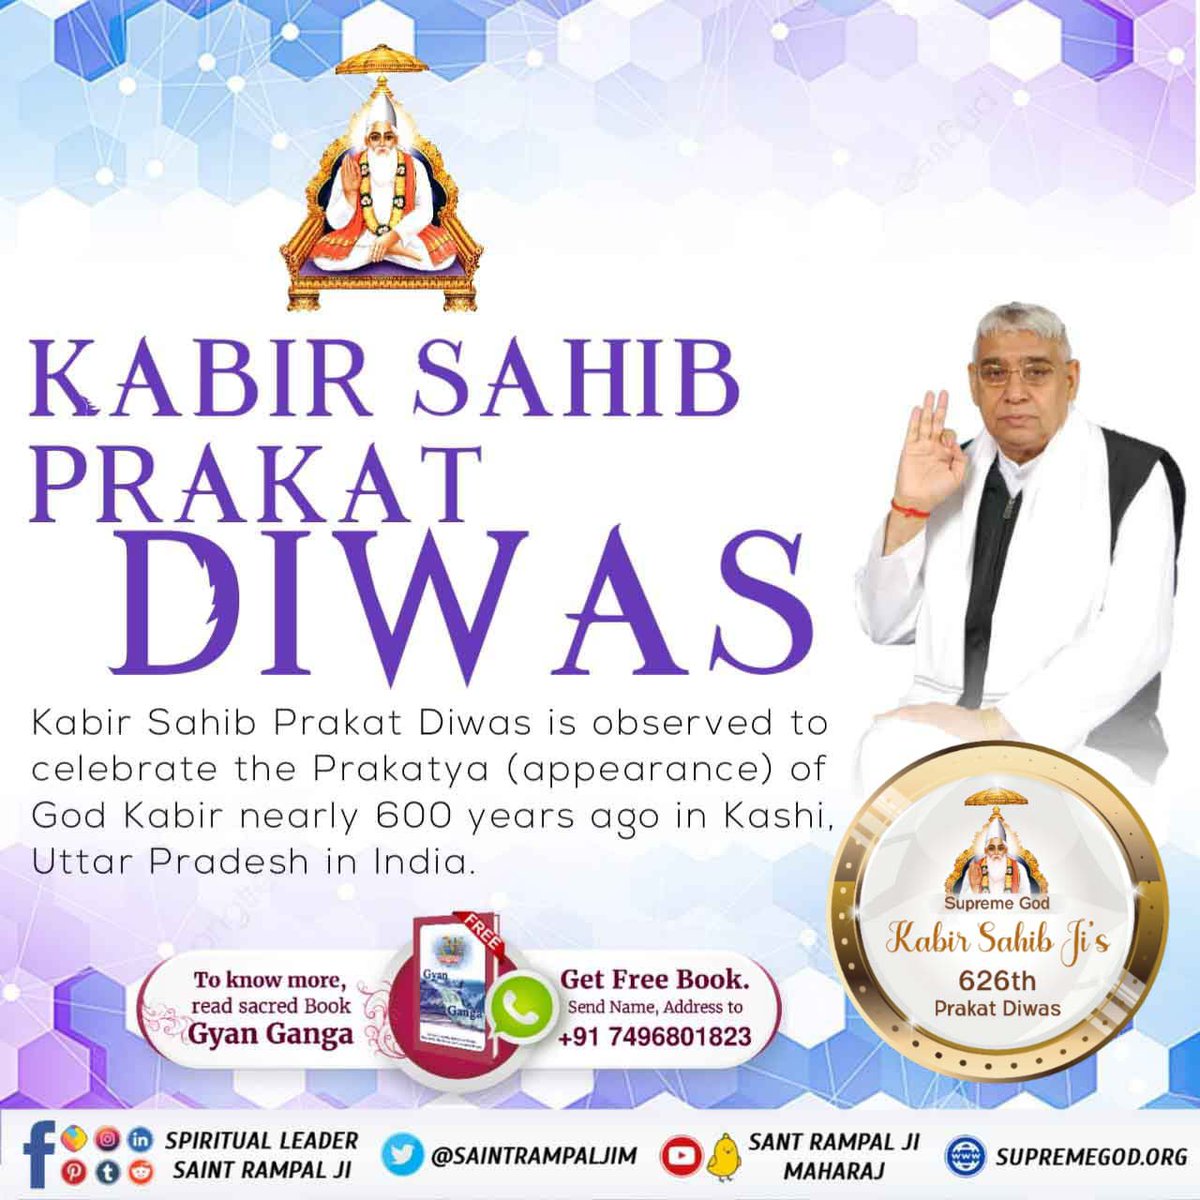 #626वां_कबीरसाहेब_प्रकटदिवस

In, 1398 Lord Kabir Ji descended from his Supreme Abode Satlok and appeared on a lotus in Lehartara Pond in Kashi, Uttarpradesh to perform his divine plays in order to grant complete Salvation to his beloved souls.

Sant Rampal Ji Live Program